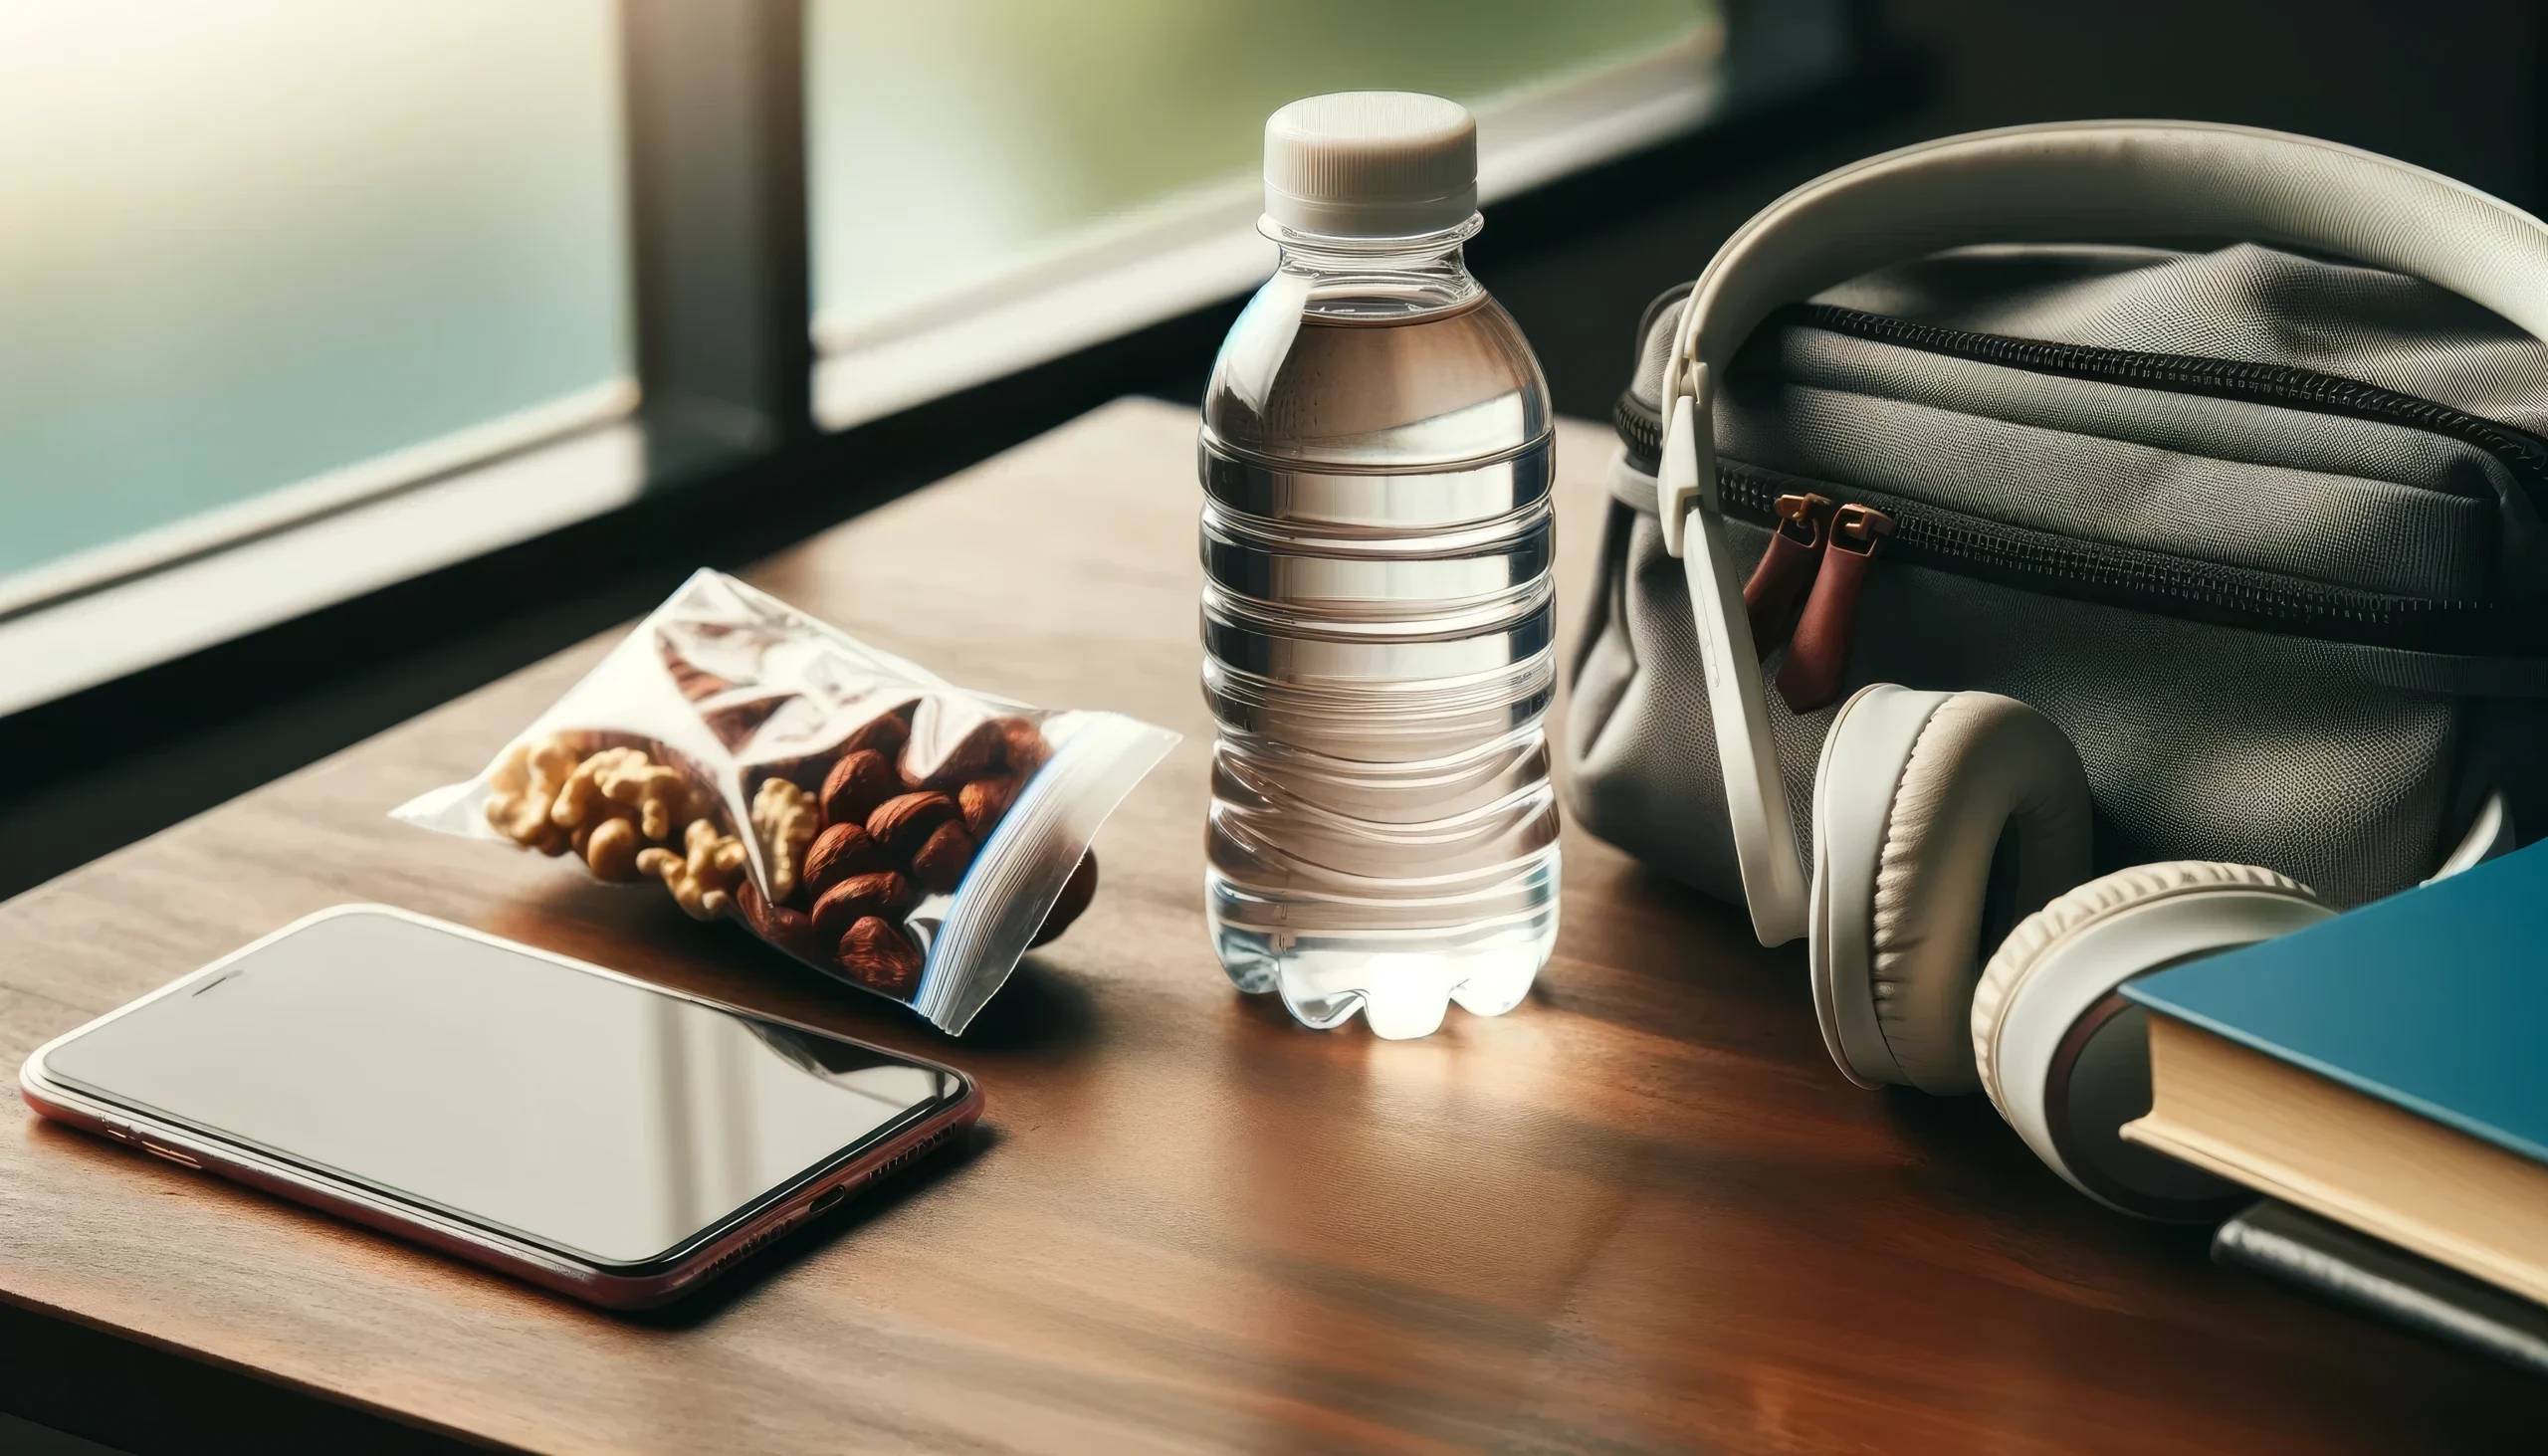 Neatly organized desk with a water bottle, a smartphone, and a clear plastic bag of nuts, prepared for the COMLEX Level 1 exam.